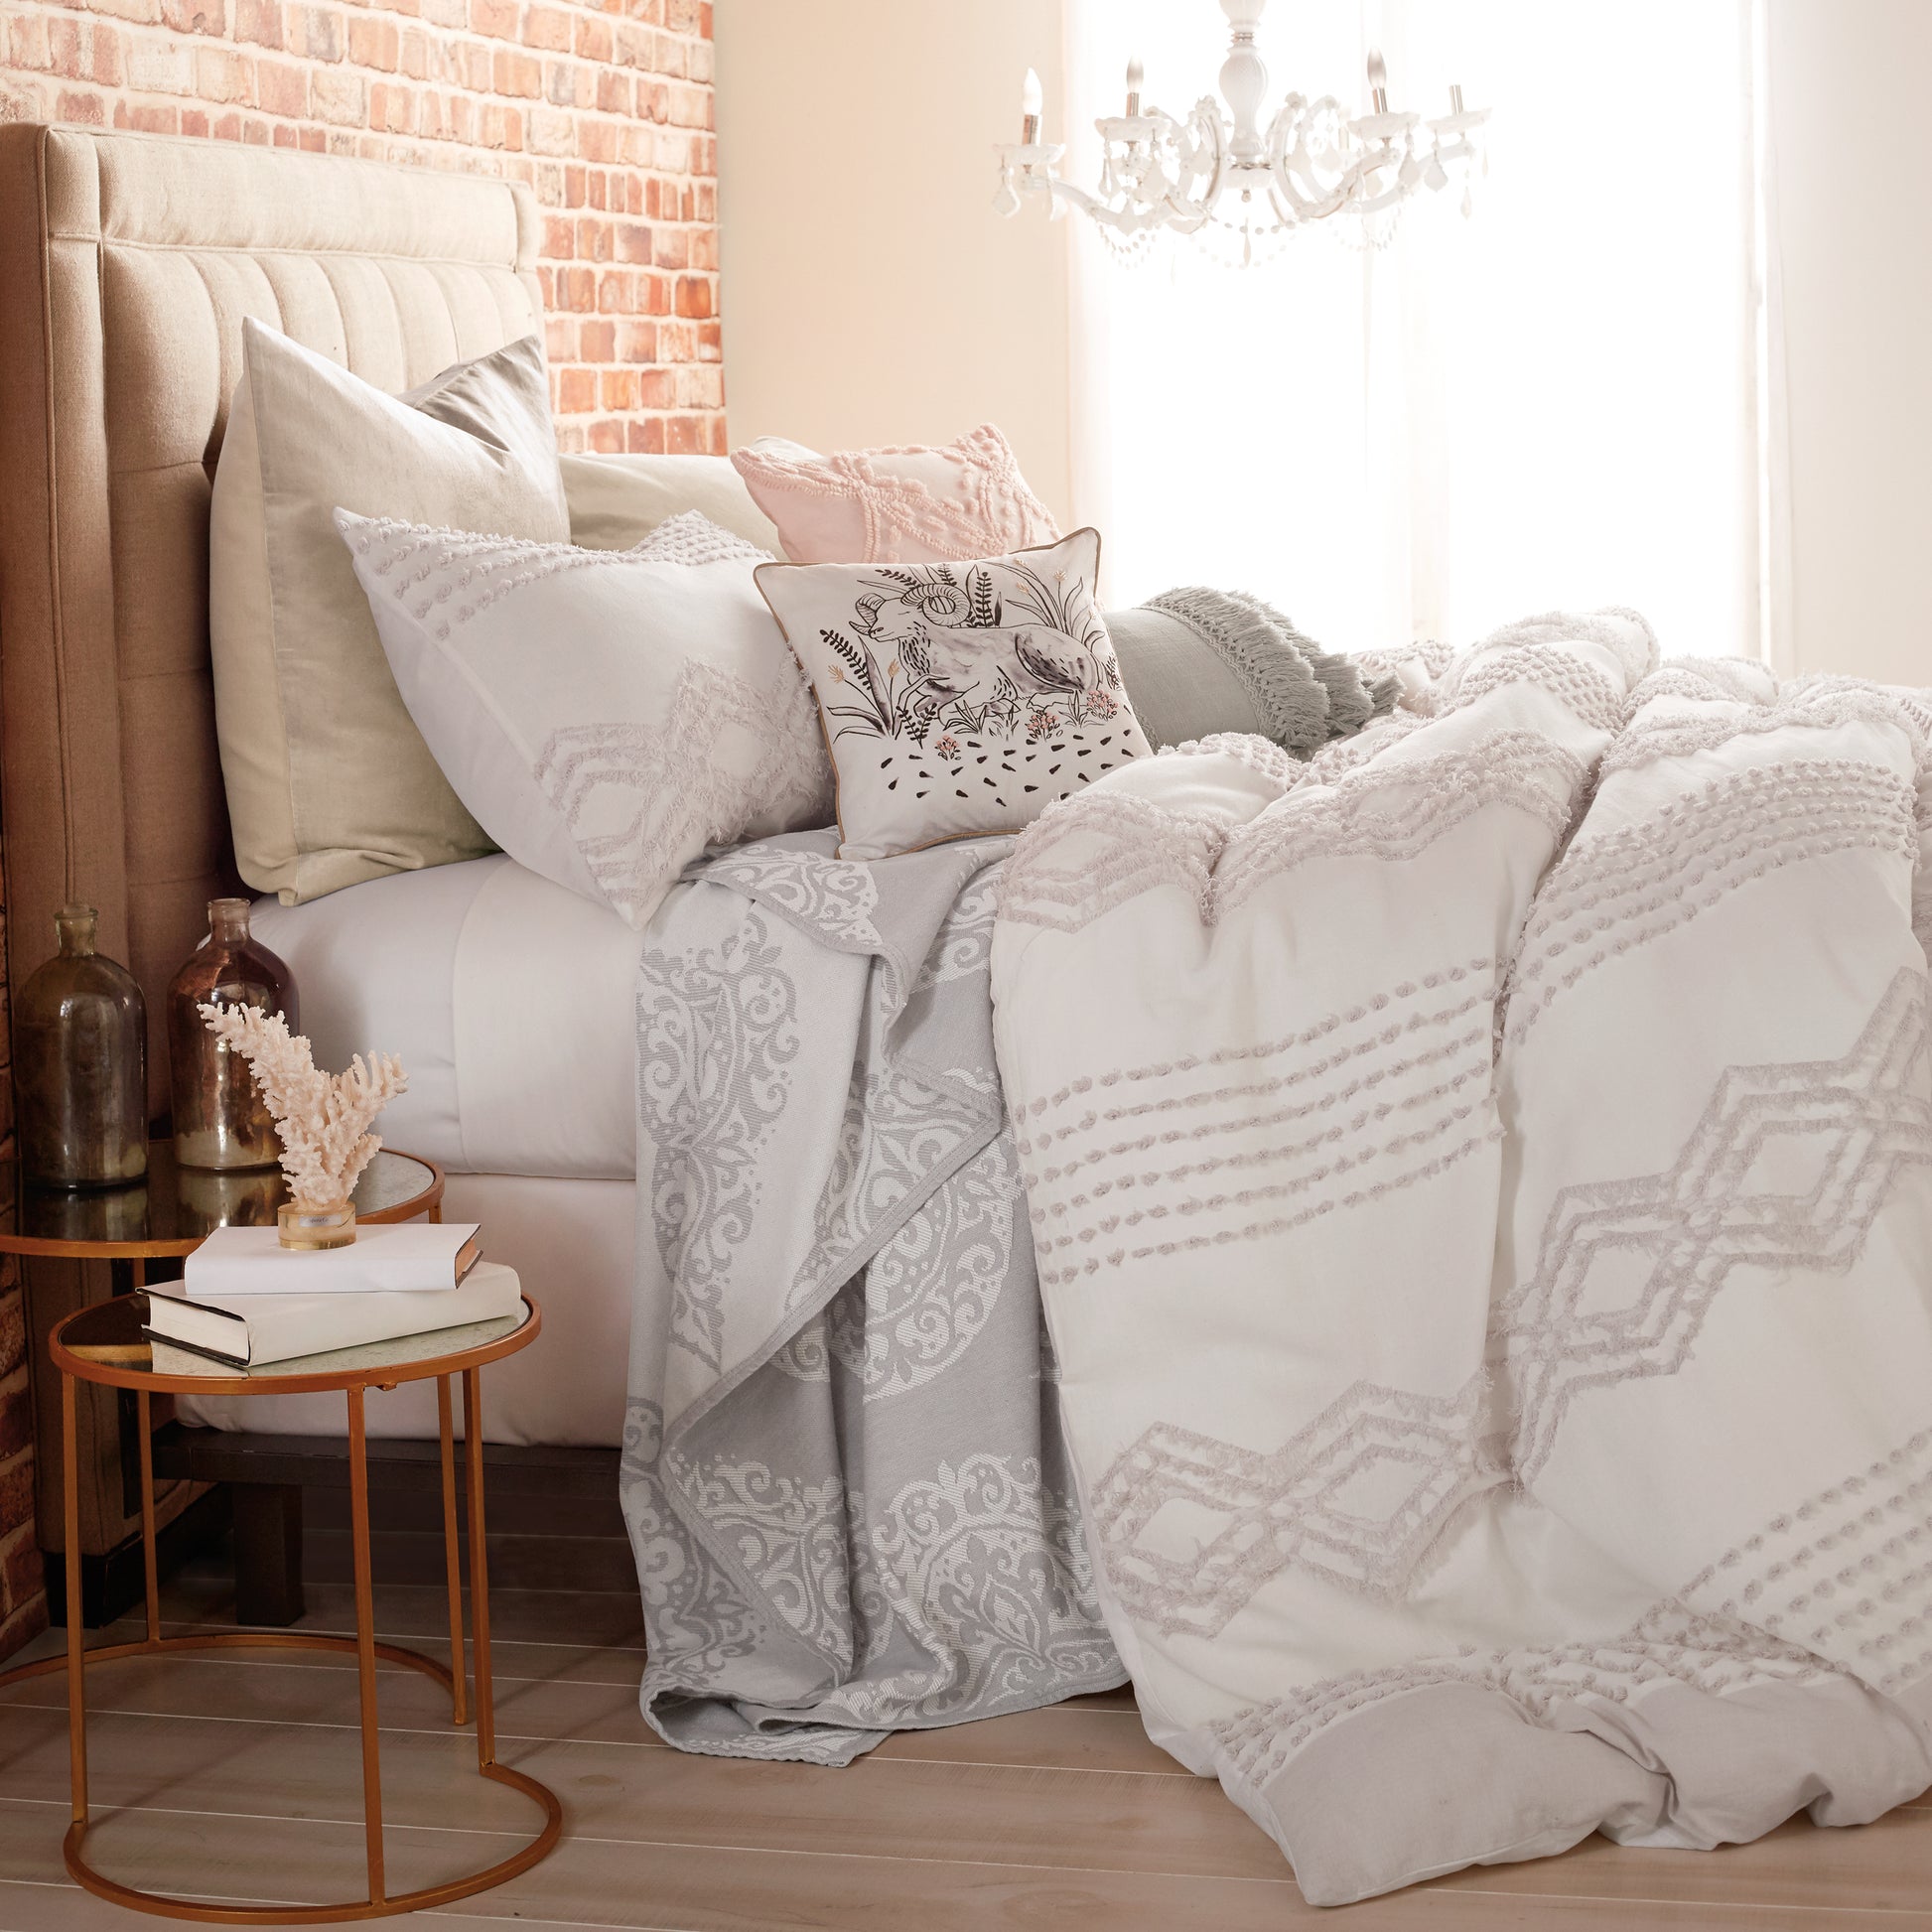 Peri Home Cut Geo Comforter Bedding Collection